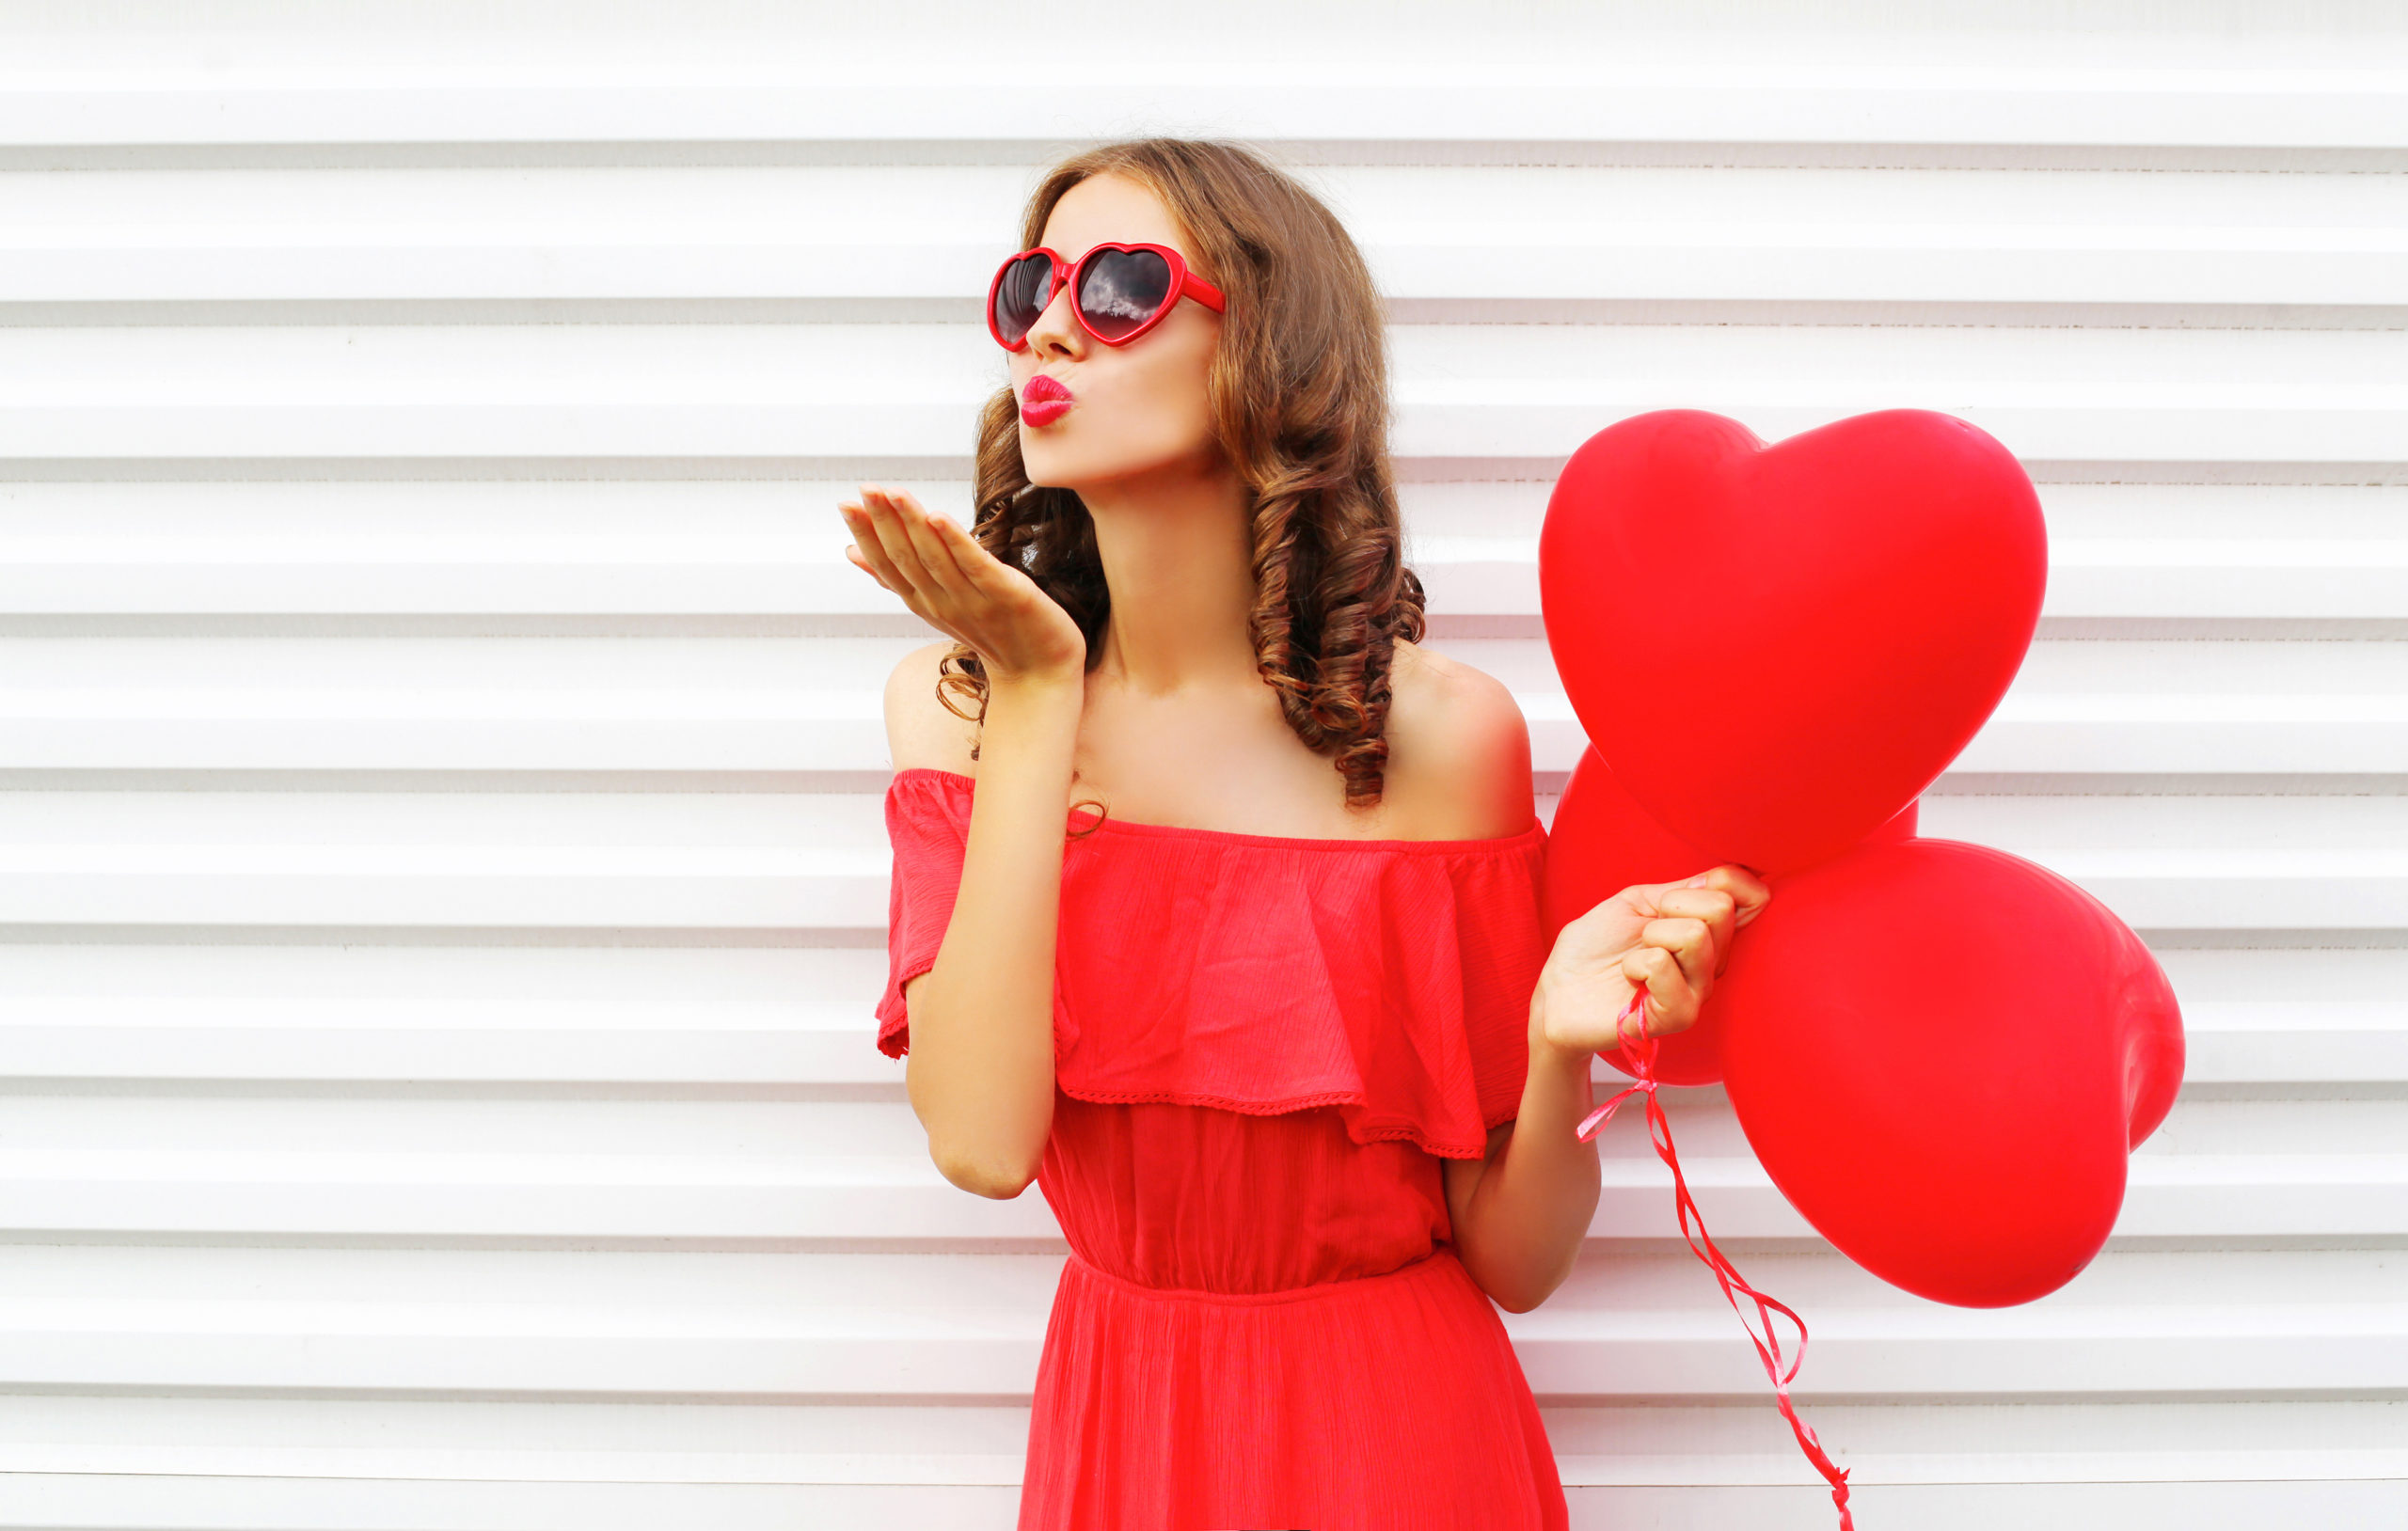 Portrait woman in red dress sends air kiss with balloon heart shape over white background